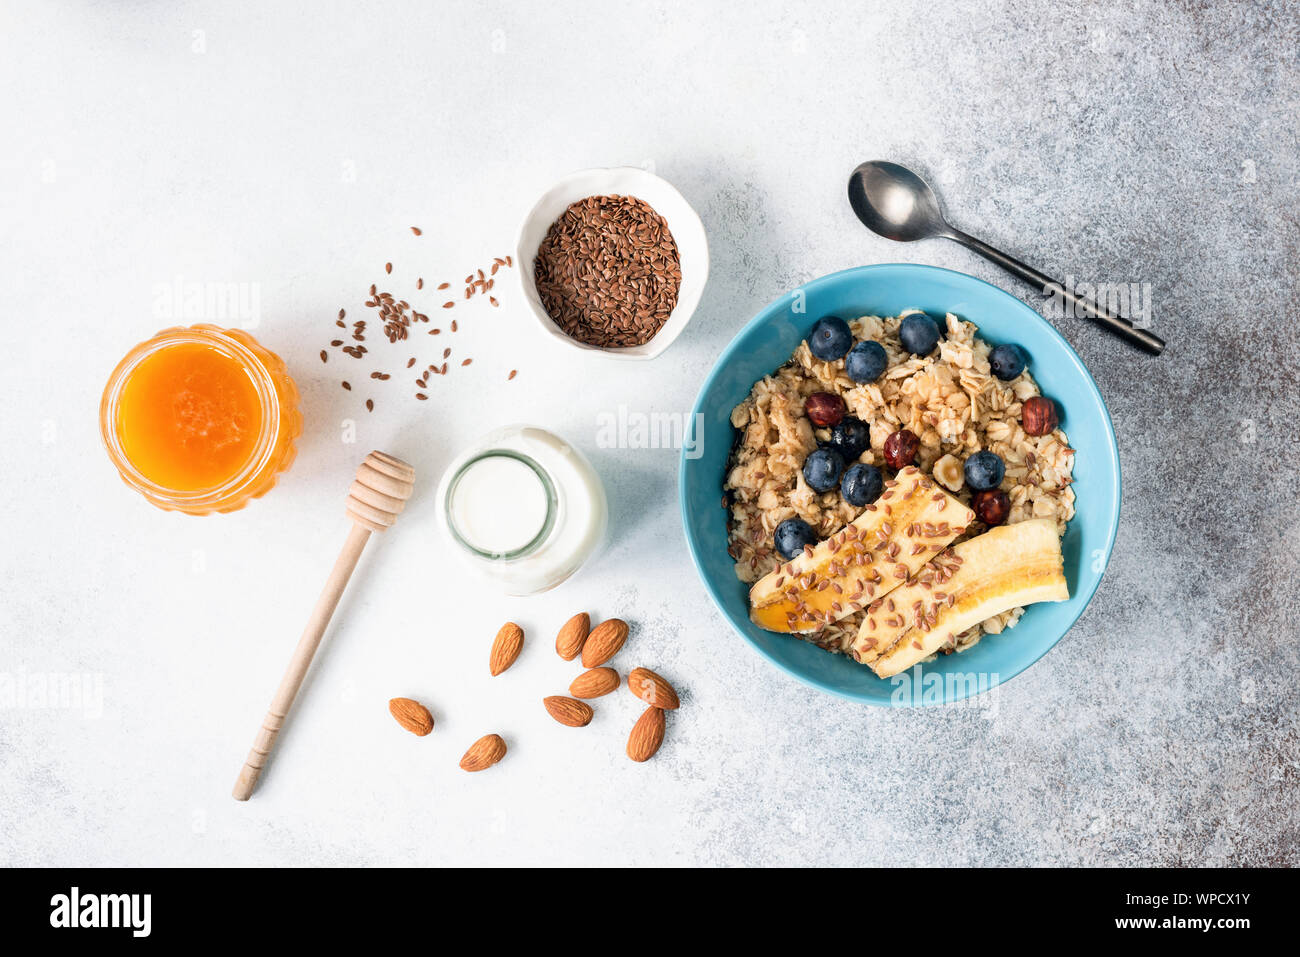 Oatmeal or breakfast oats porridge with fruits, flax seeds, honey in a bowl. Table top view. Healthy breakfast food ingredients, clean eating concept Stock Photo